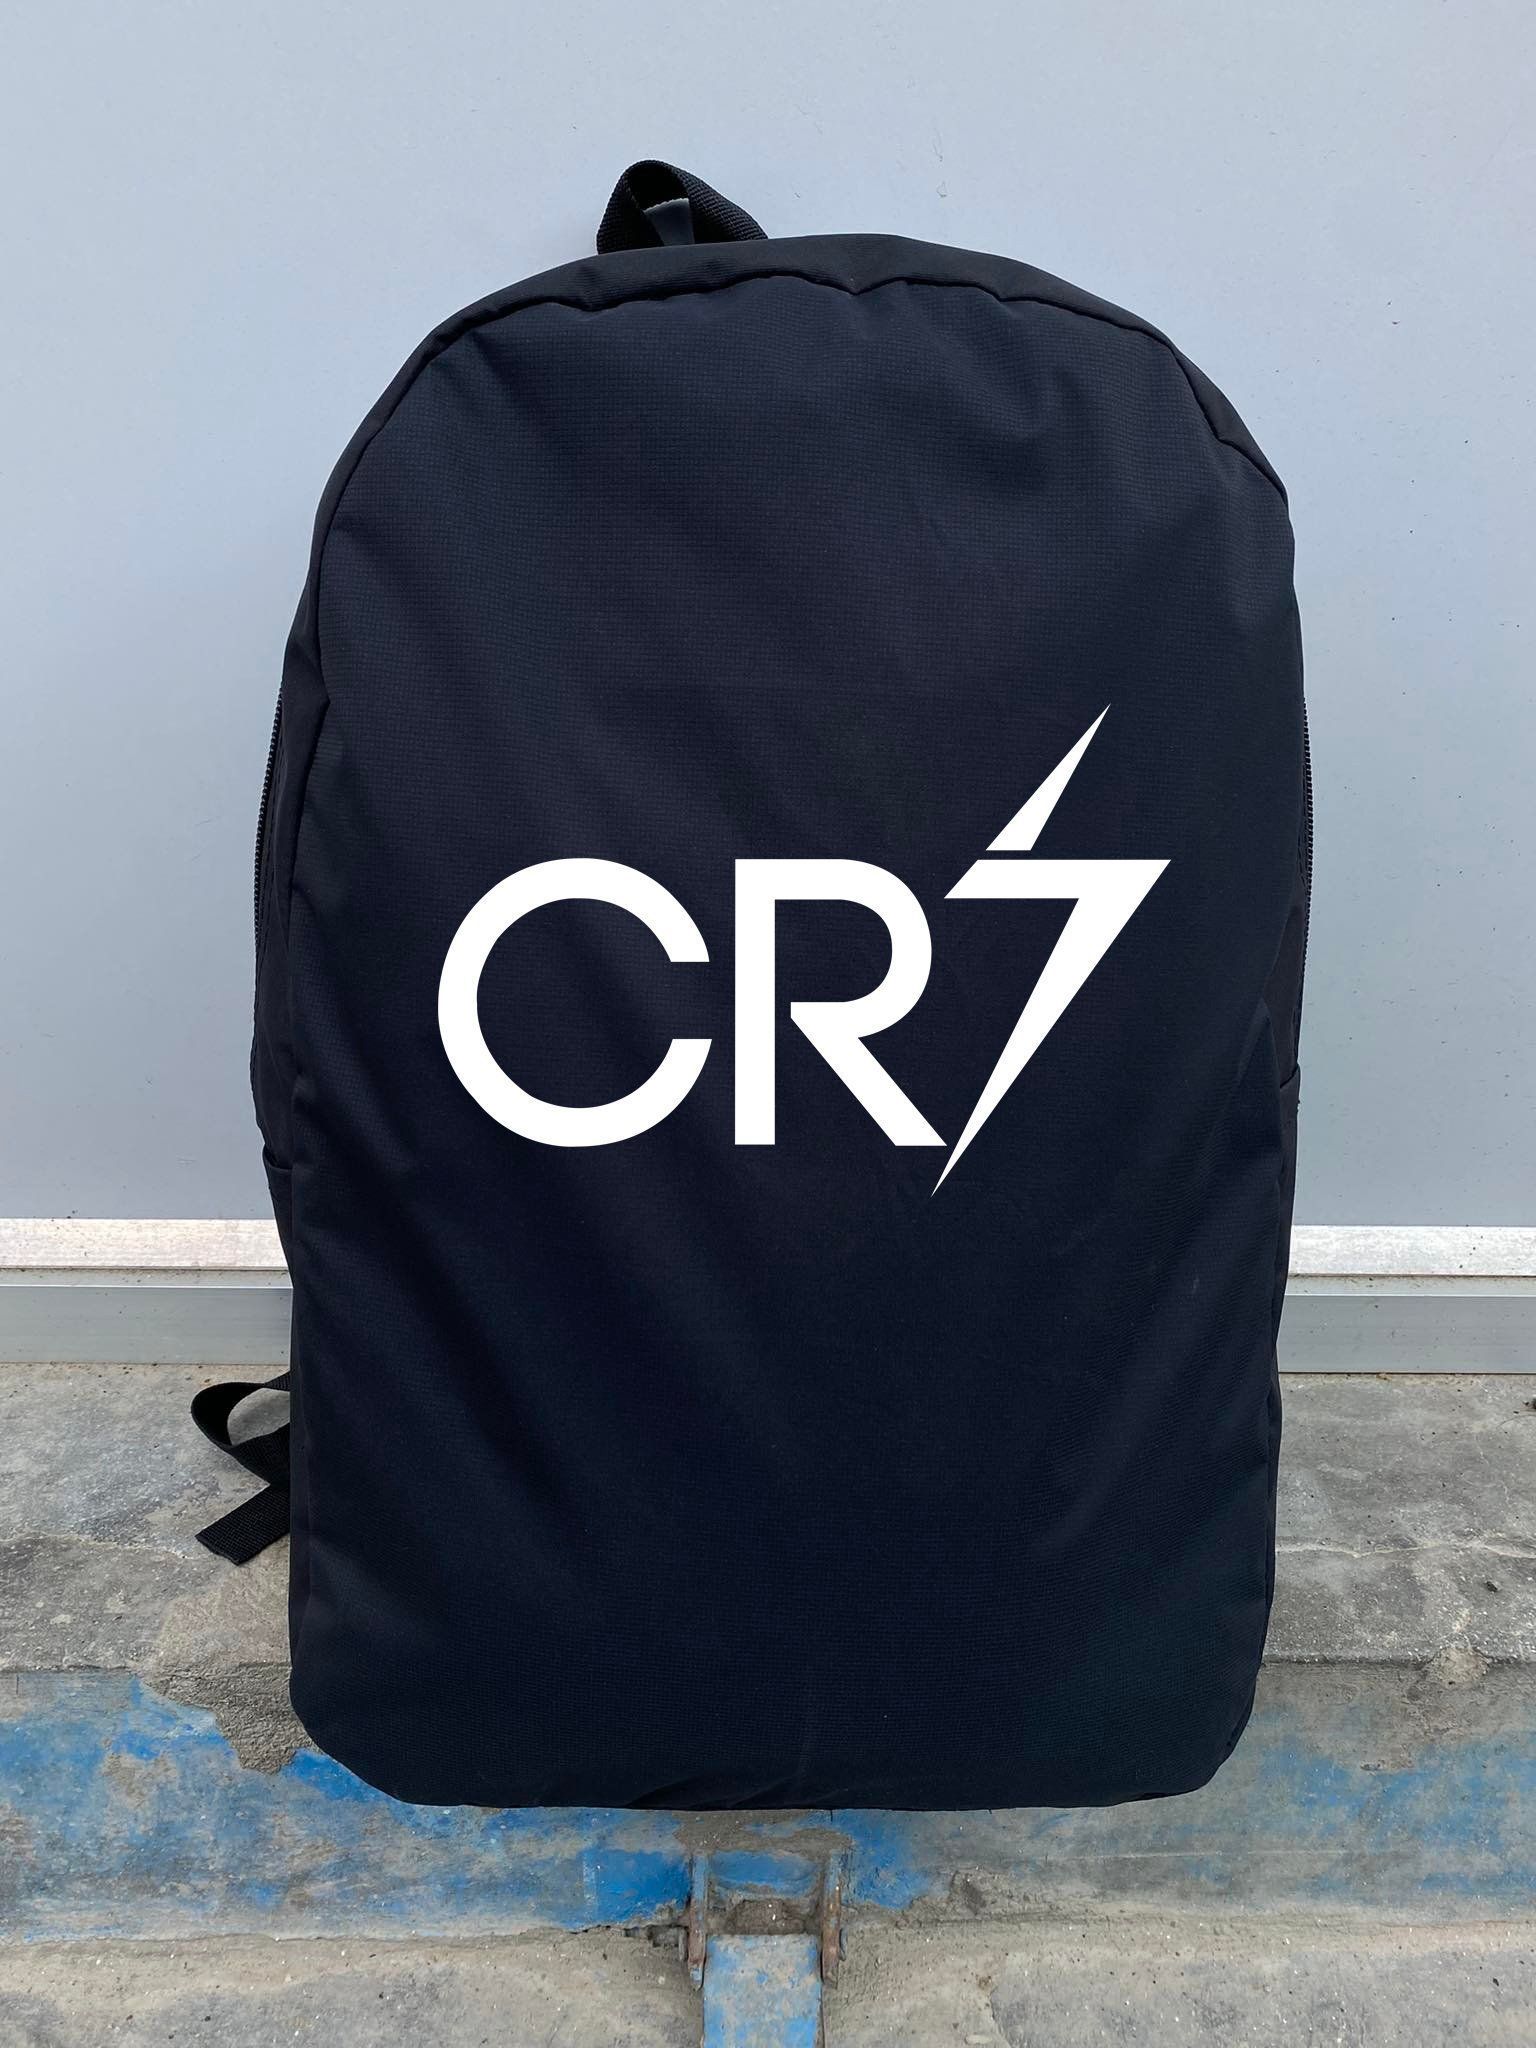 EXTENSIBLE SCHOOL BACKPACK SPORT OFFICIAL CR7 CRISTIANO RONALDO